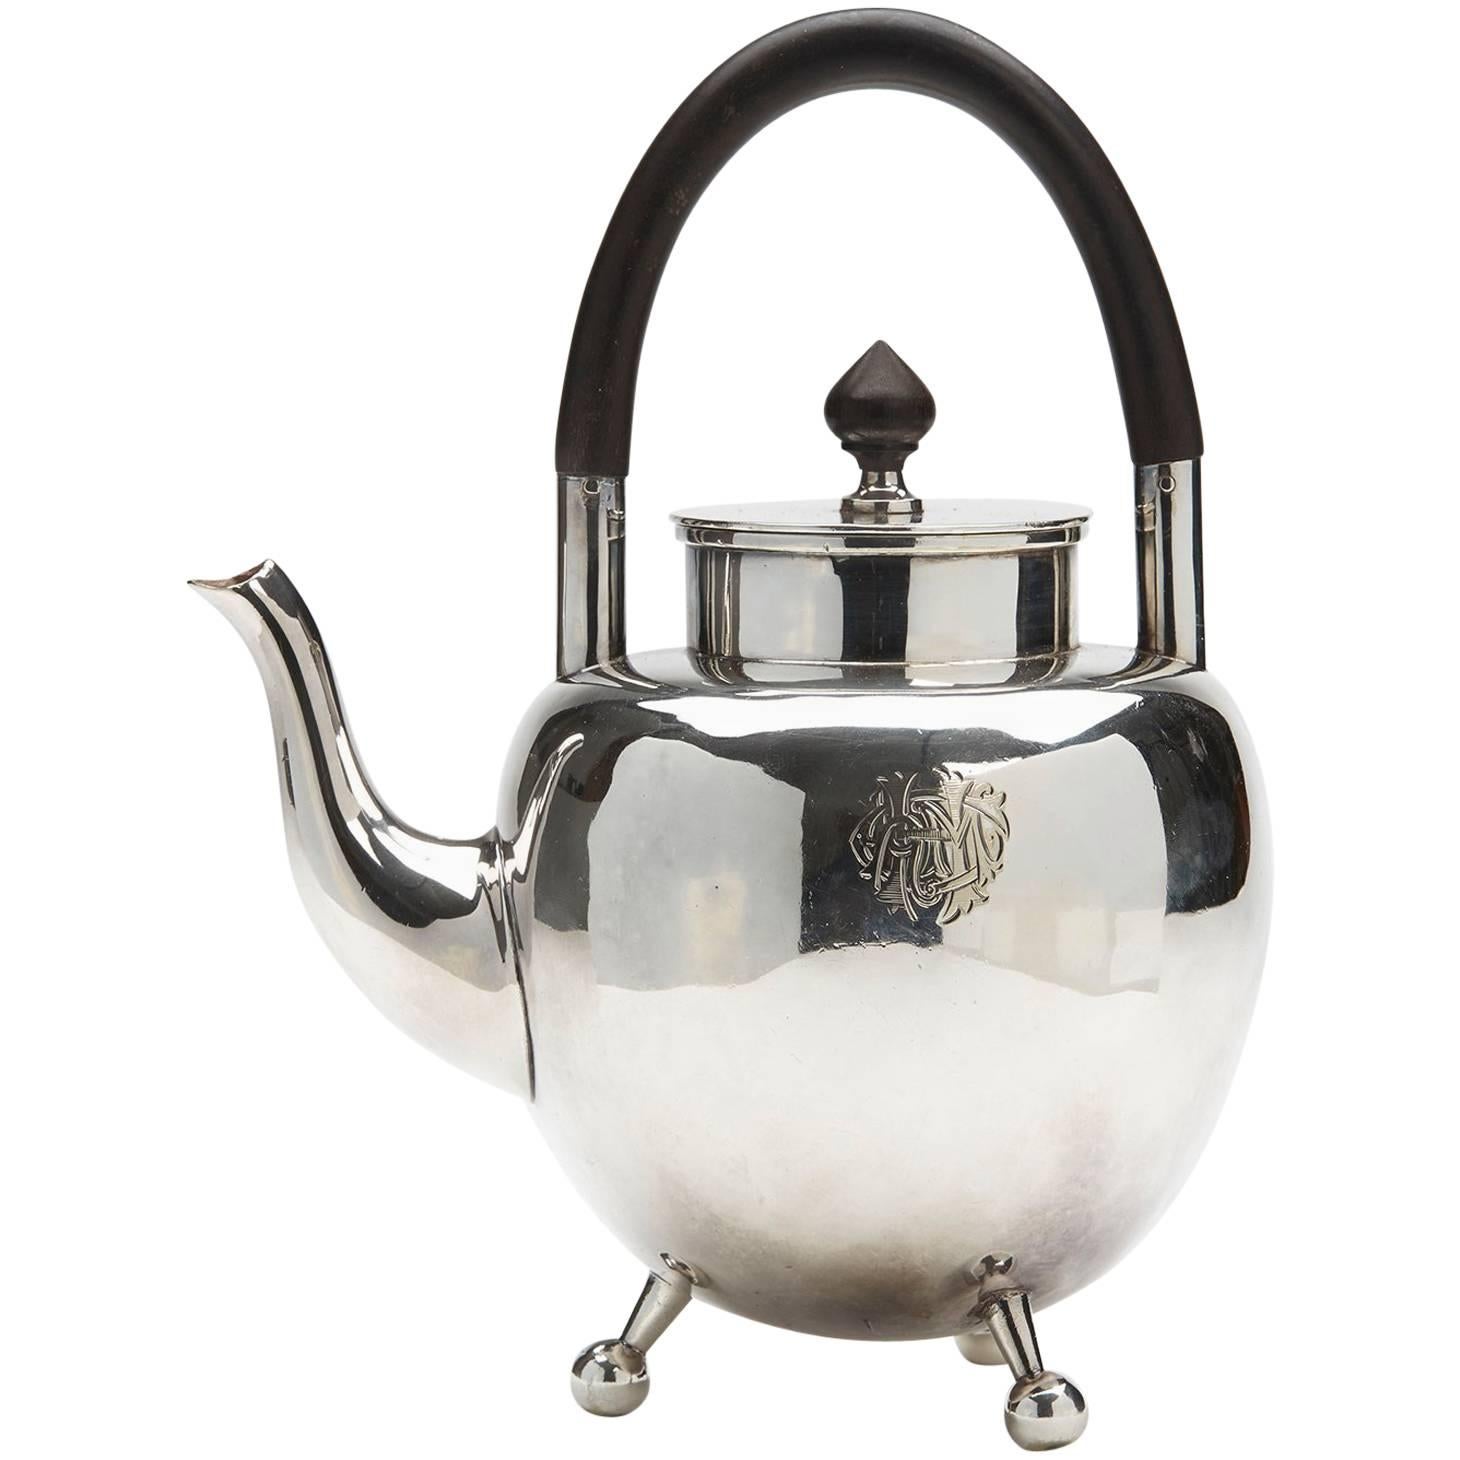 Hukin And Heath Christopher Dresser Silver Plated Teapot 1879 At